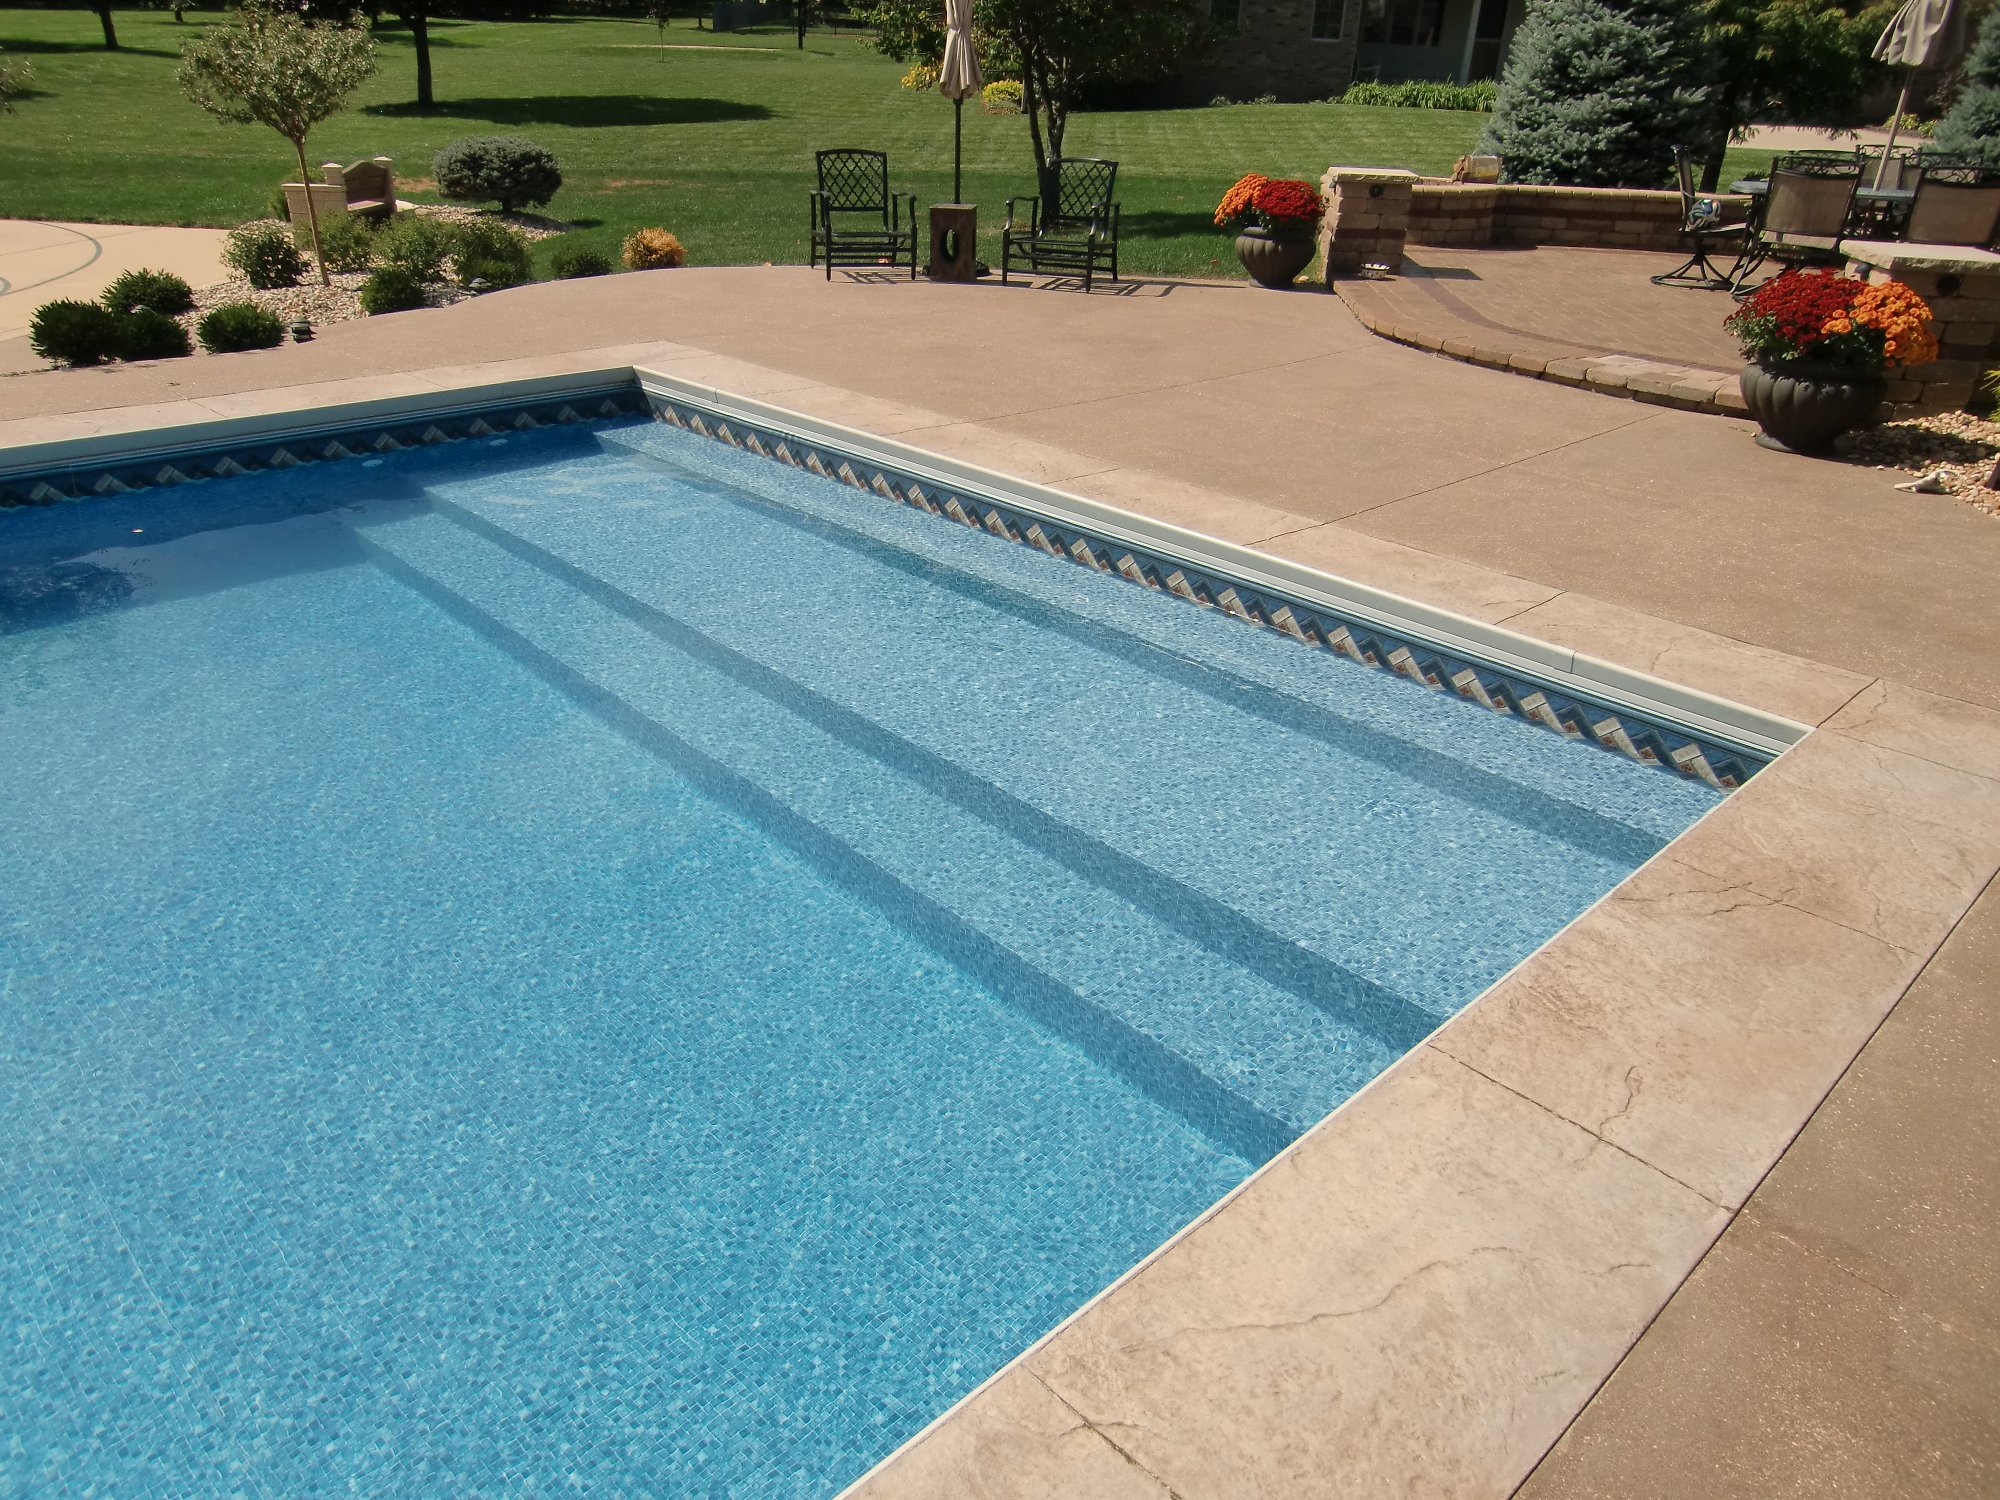 Can I drain my pool water on the lawn Lawn and pool experts advise on best practice